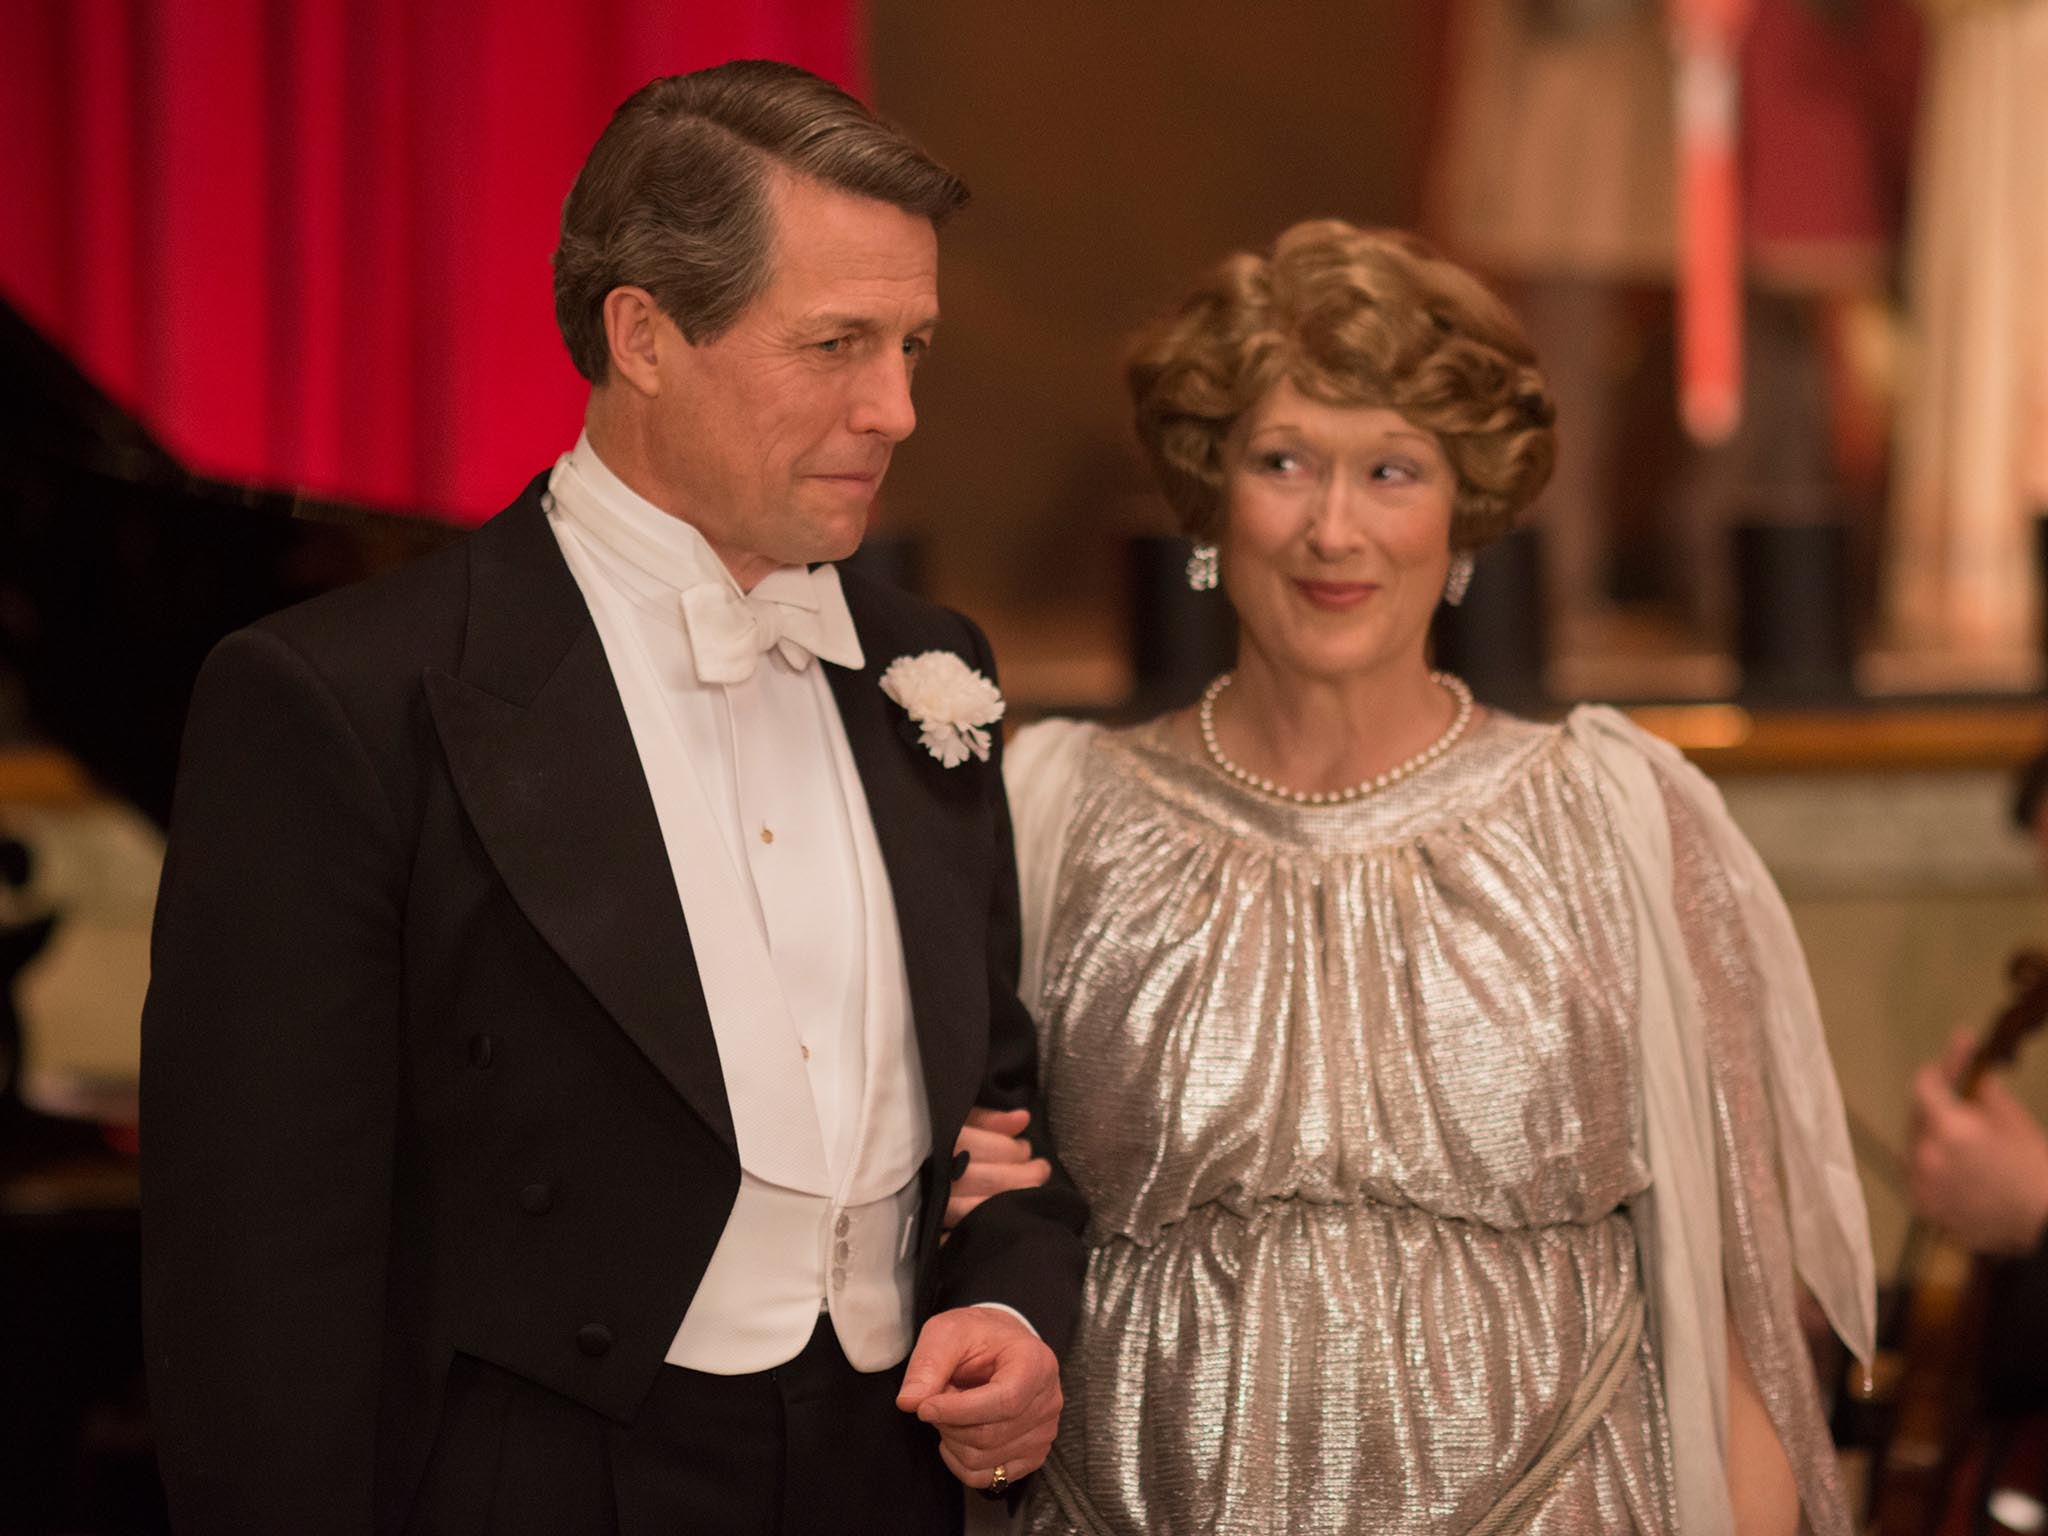 &#13;
Hugh Grant as St Clair Bayfield and Meryl Streep as the title character in ‘Florence Foster Jenkins’ &#13;